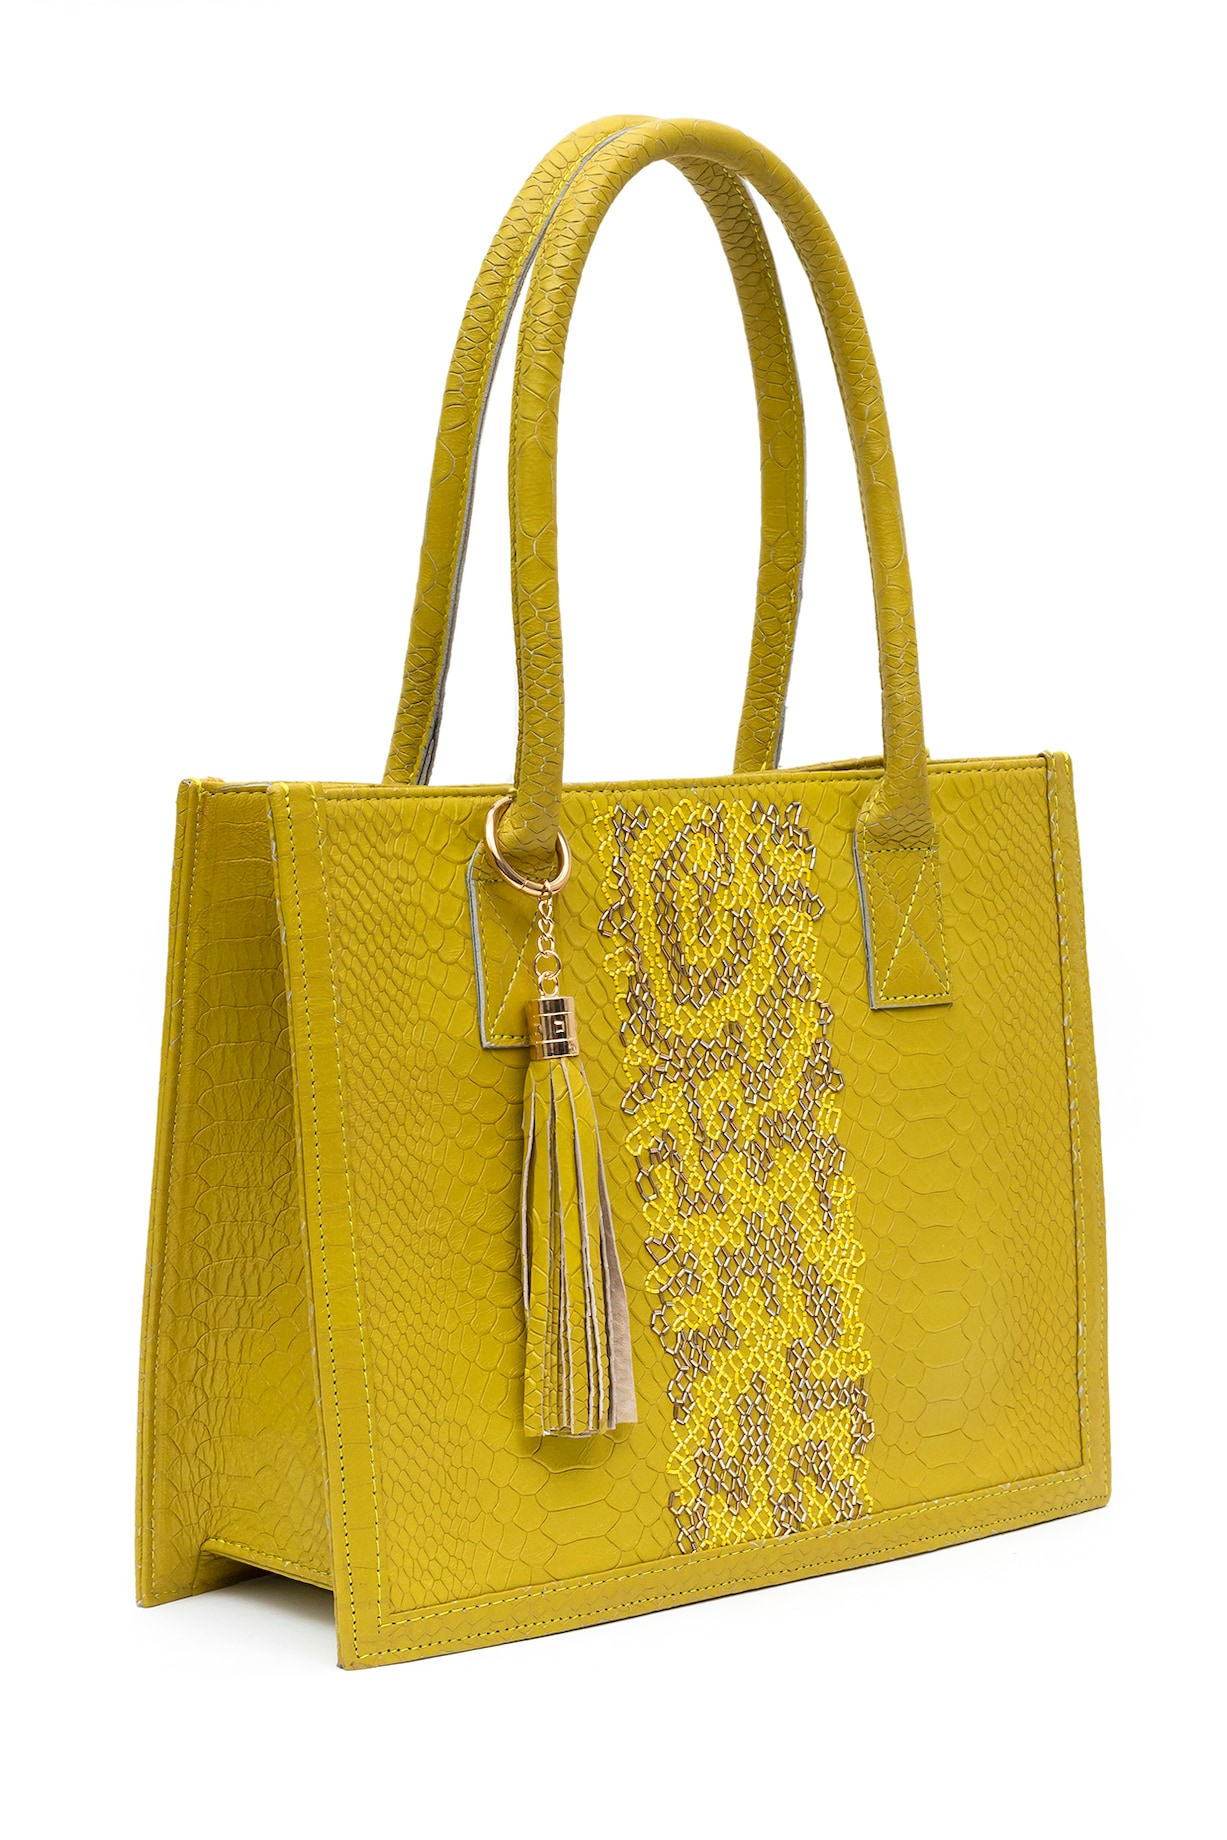 Ochre Yellow Textured Leather Tote Bag Design by SG BY SONIA GULRAJANI at  Pernia's Pop Up Shop 2023